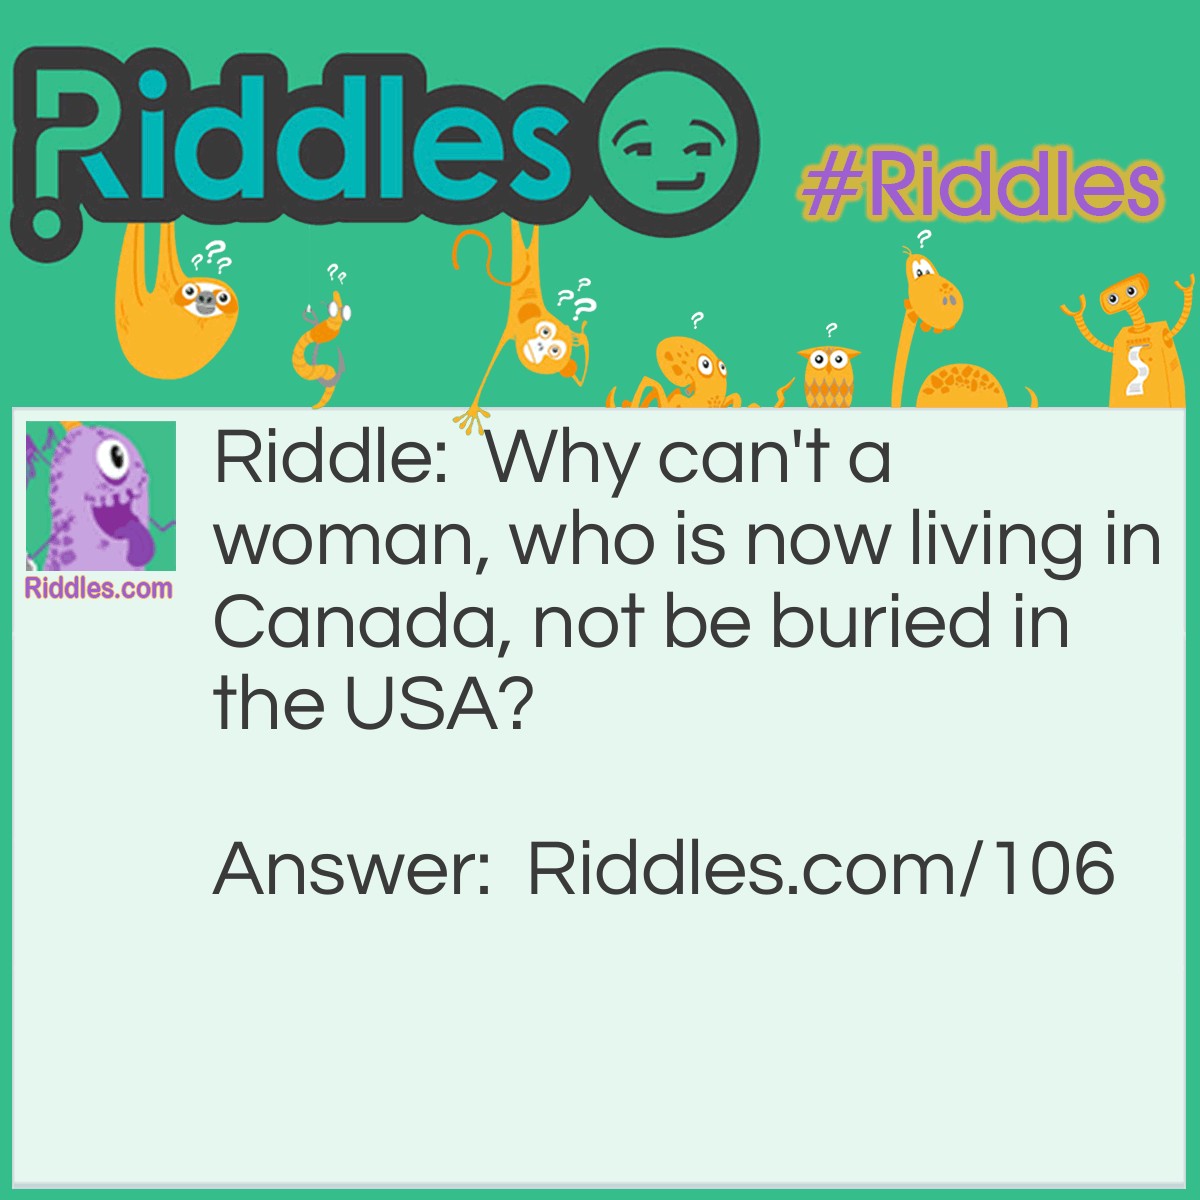 Riddle: Why can't a woman, who is now living in Canada, not be buried in the USA? Answer: Because she is still alive!